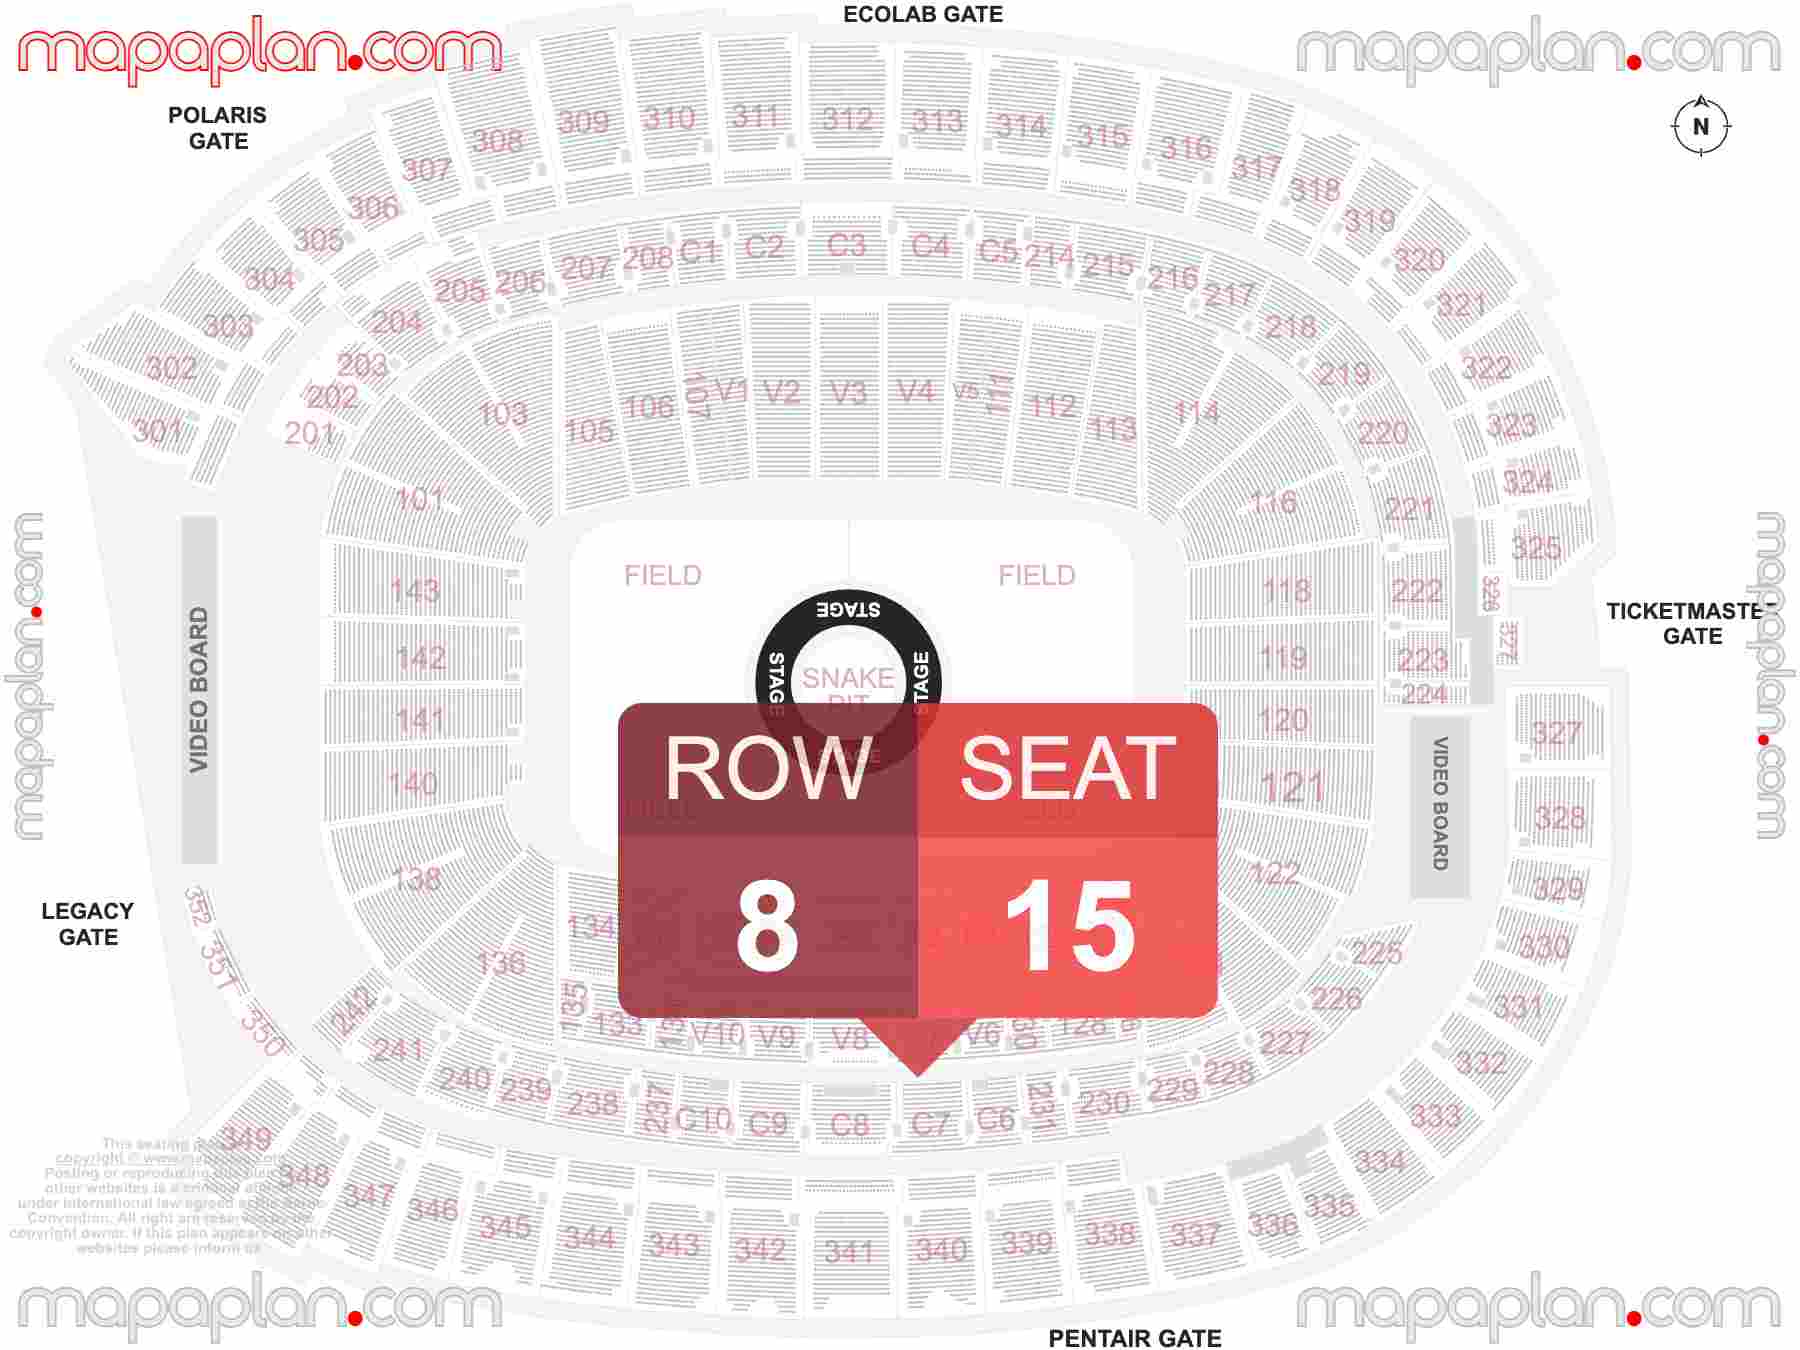 Minneapolis U.S. Bank Stadium seating chart Concert with 360 stage floor general admission standing seating chart with exact section numbers showing best rows and seats selection 3d layout - Best interactive seat finder tool with precise detailed location data